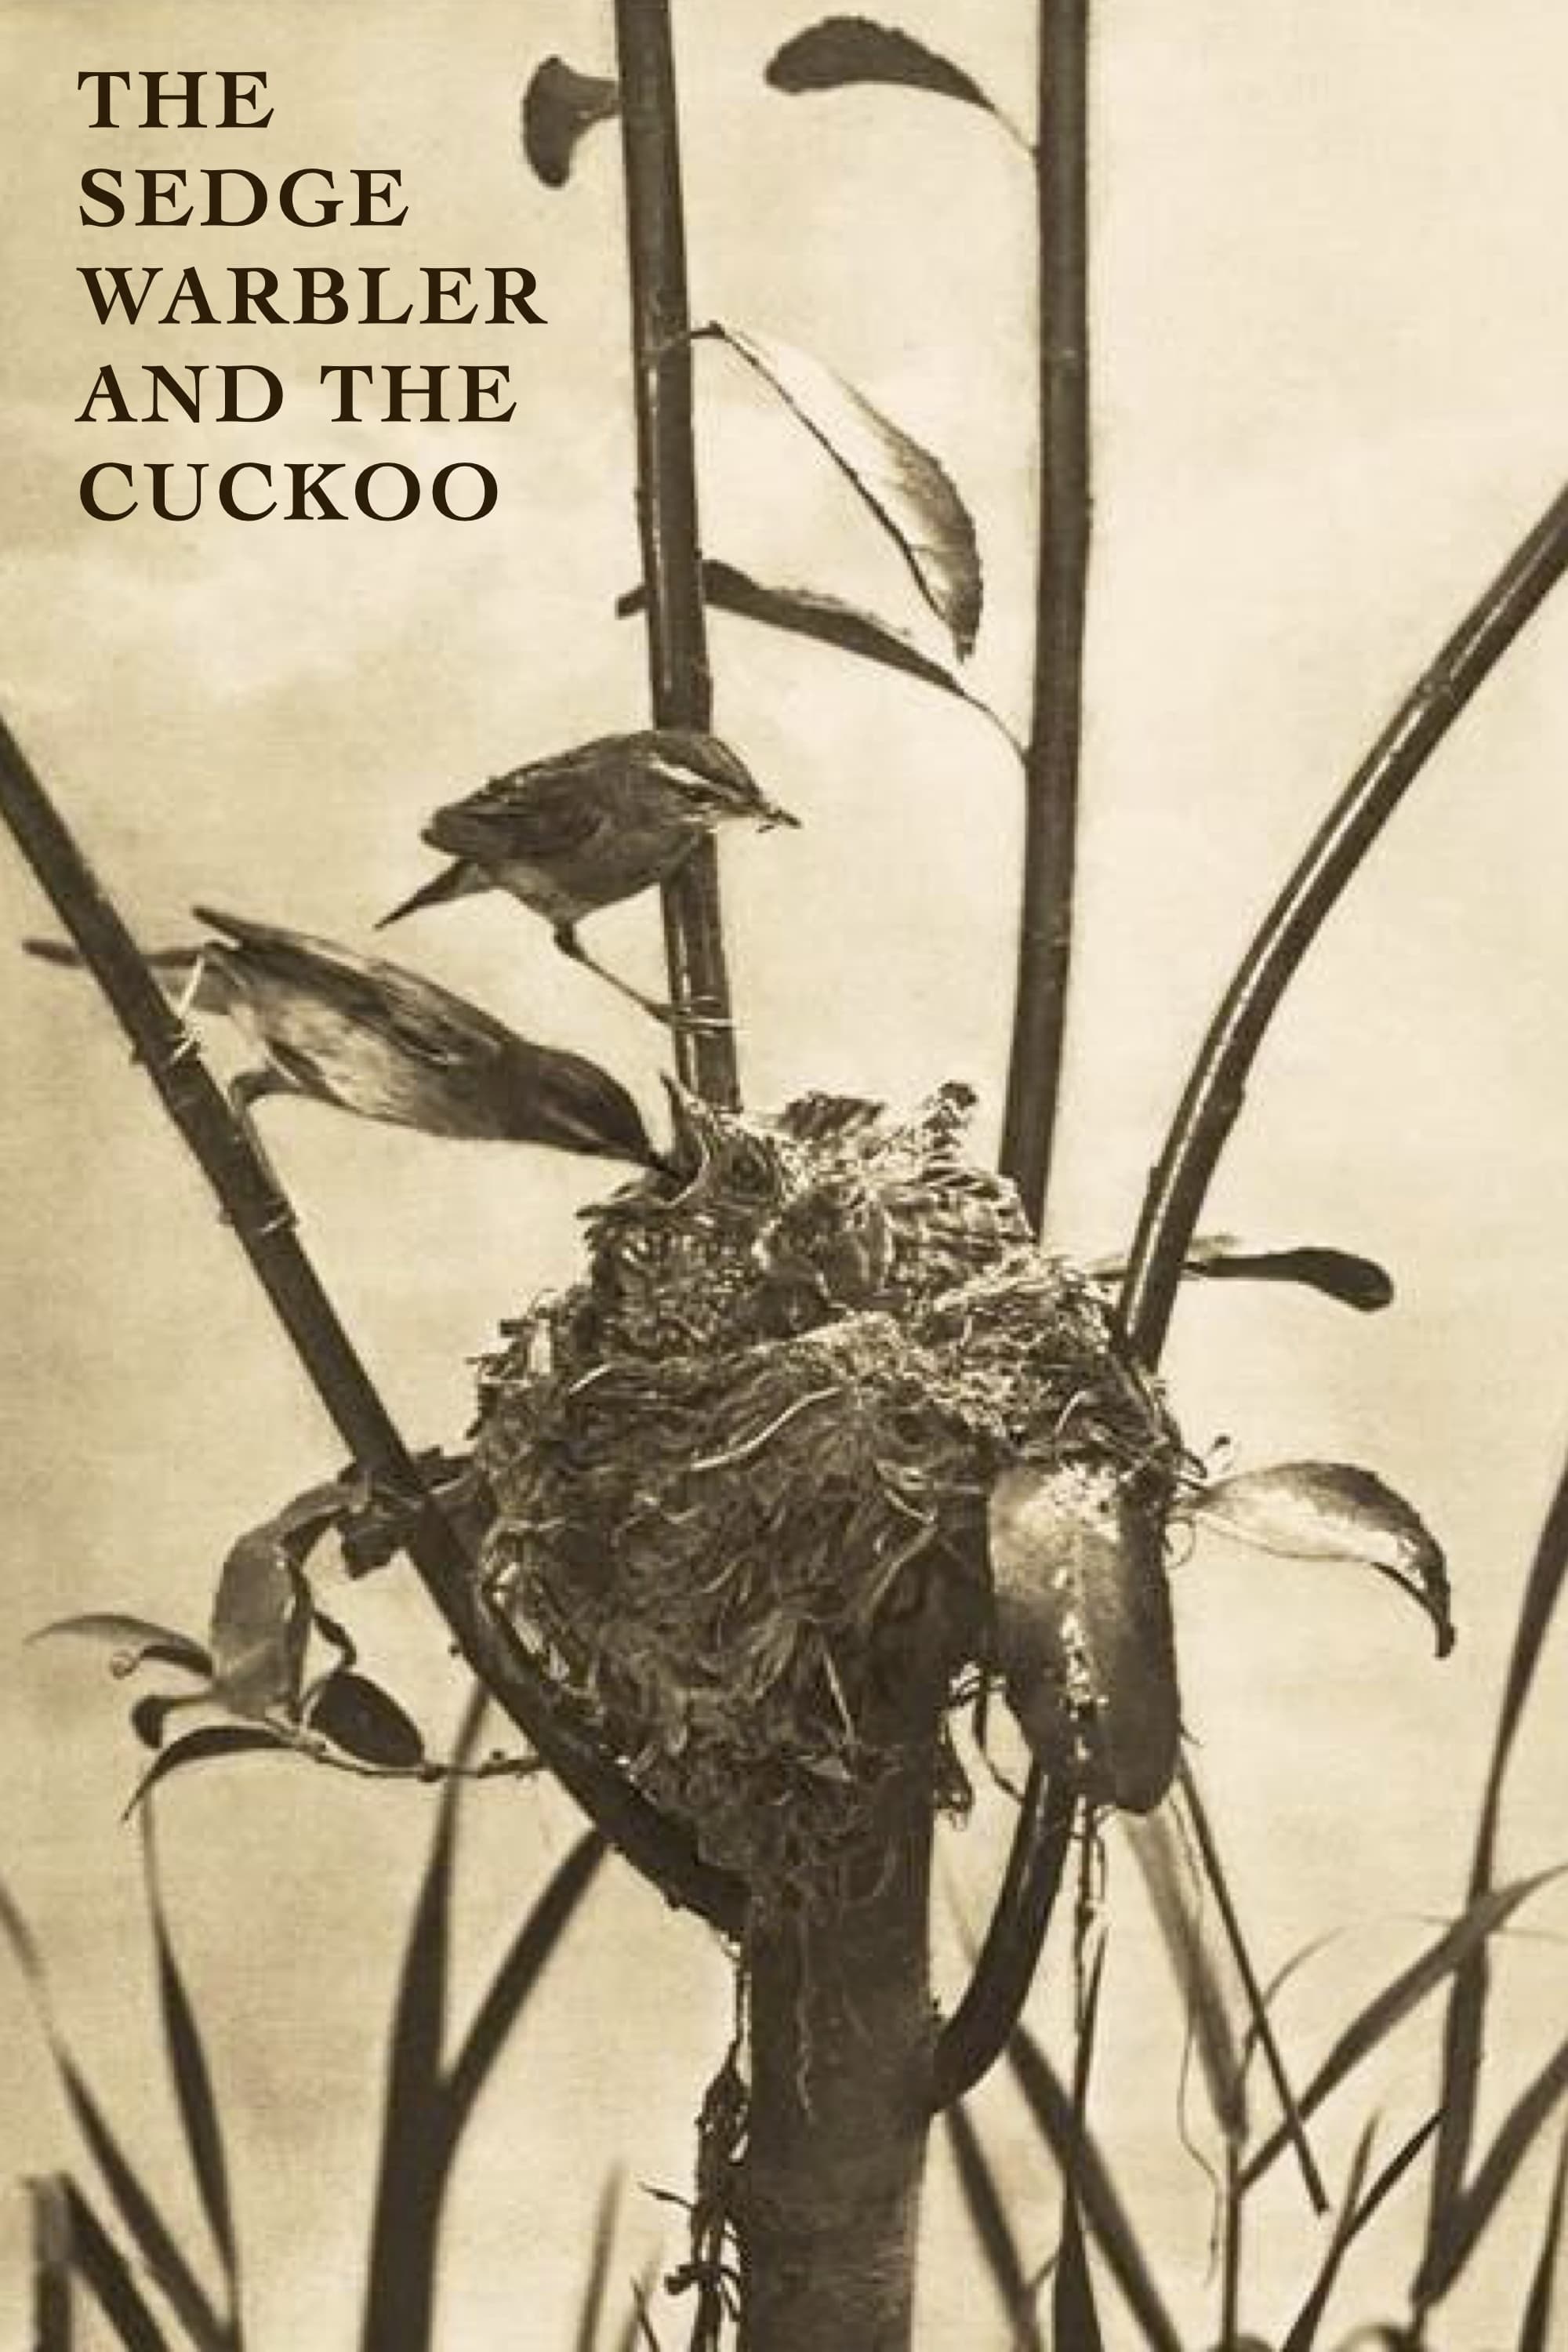 The Sedge Warbler and the Cuckoo